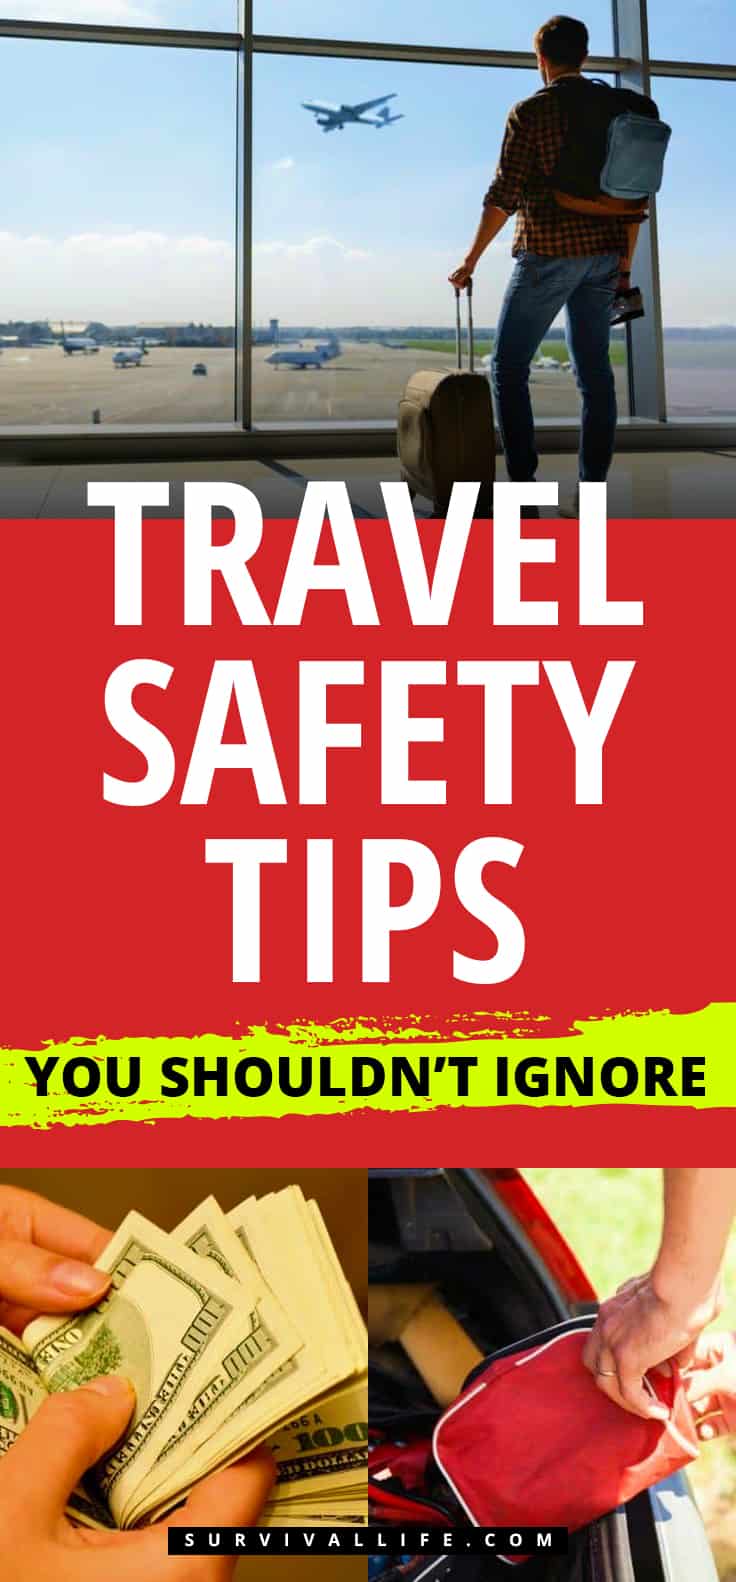  Travel Safety Tips You Shouldn't Ignore | https://survivallife.com/travel-safety-tips/